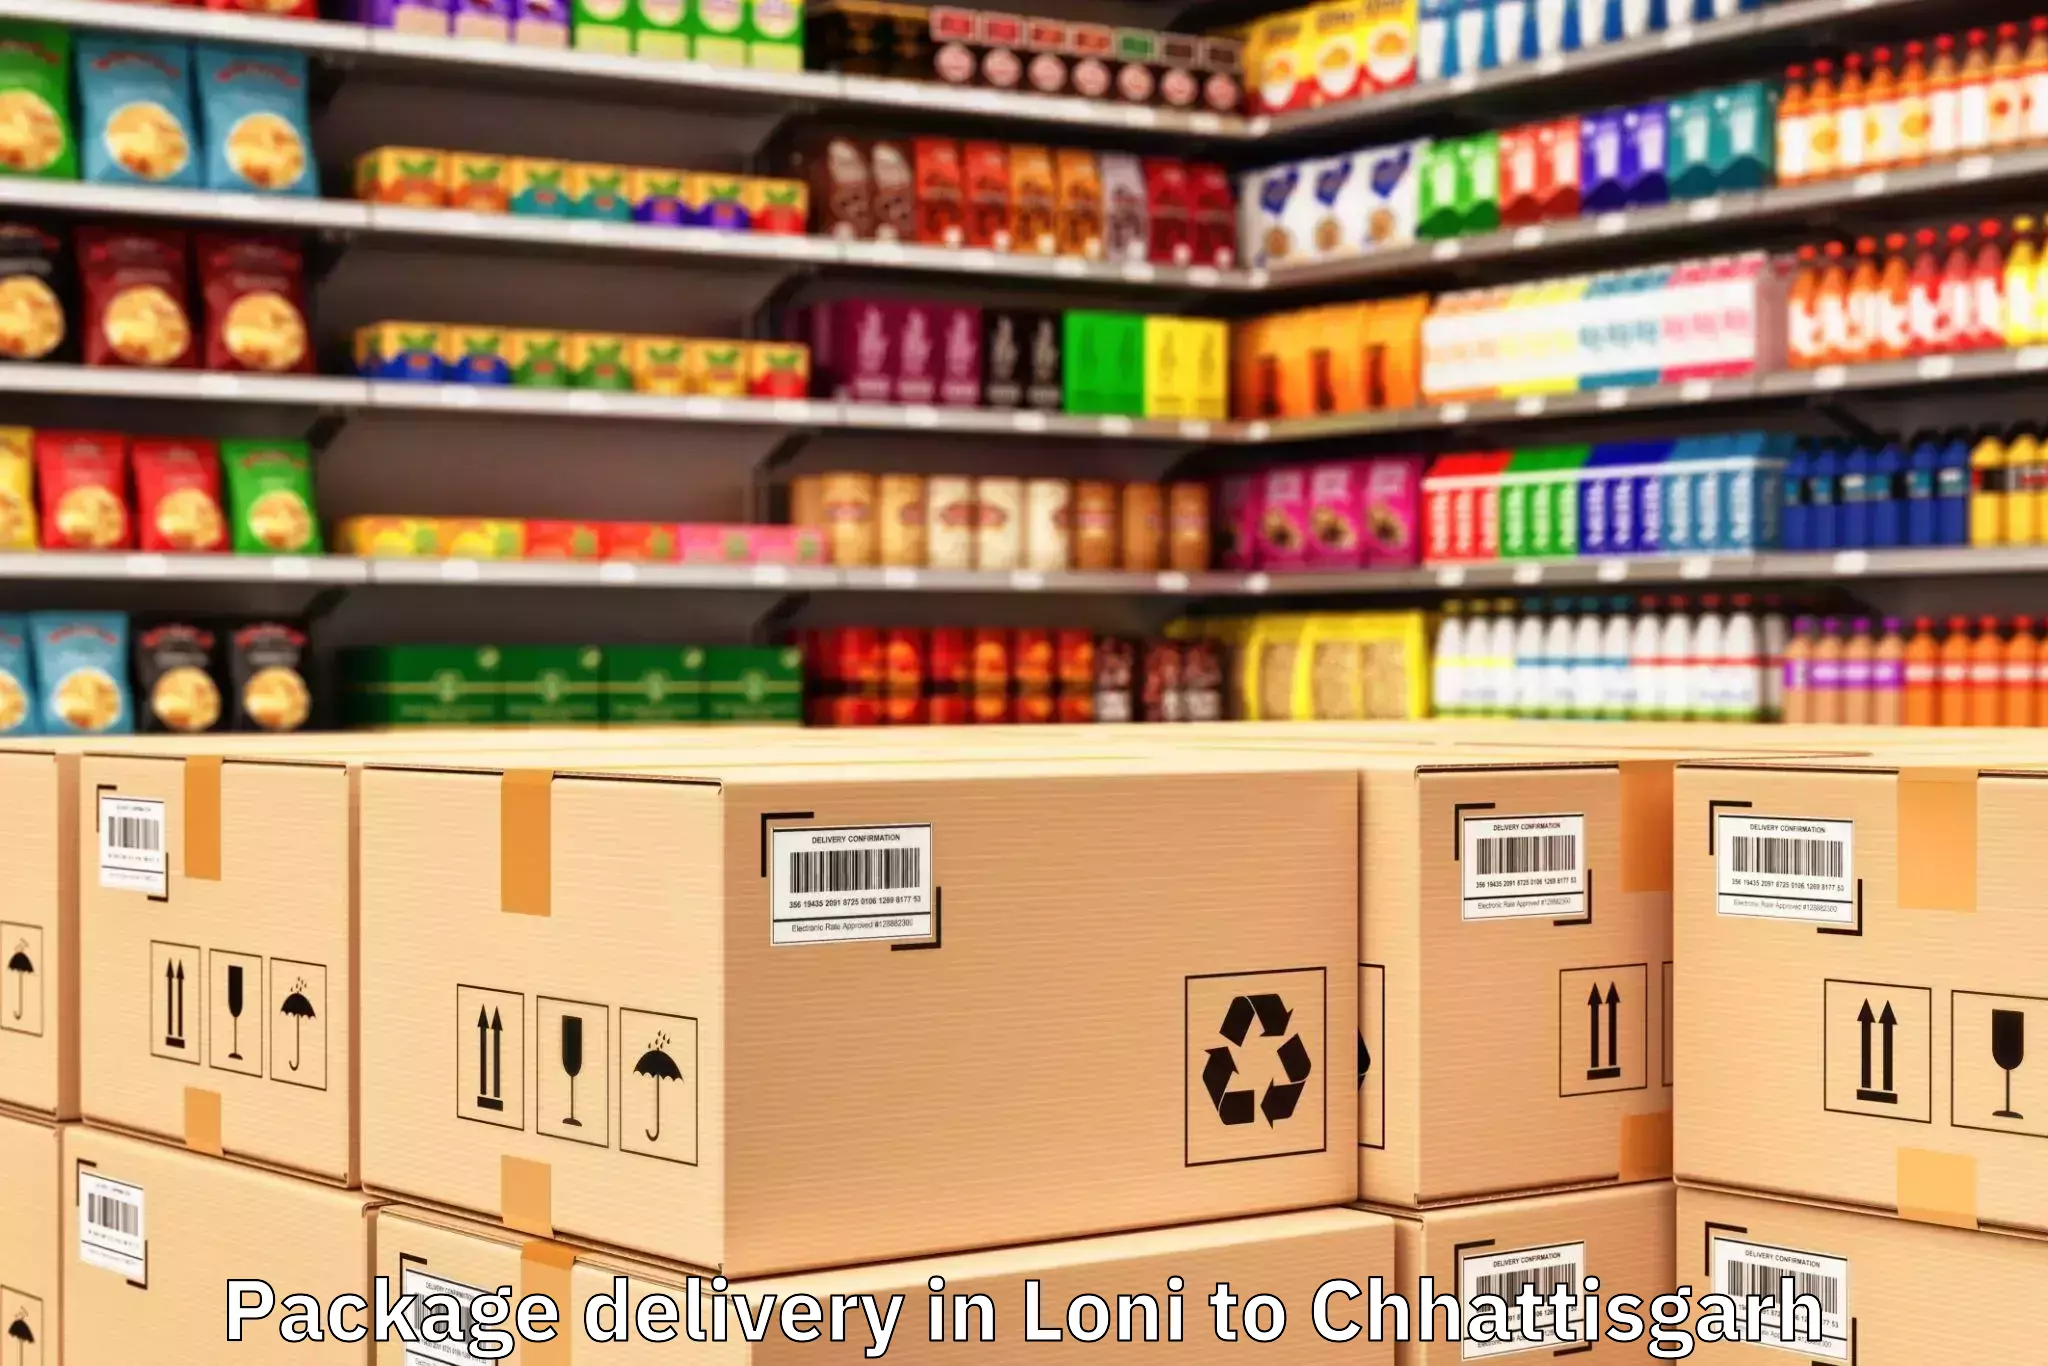 Discover Loni to Pharsabahar Package Delivery